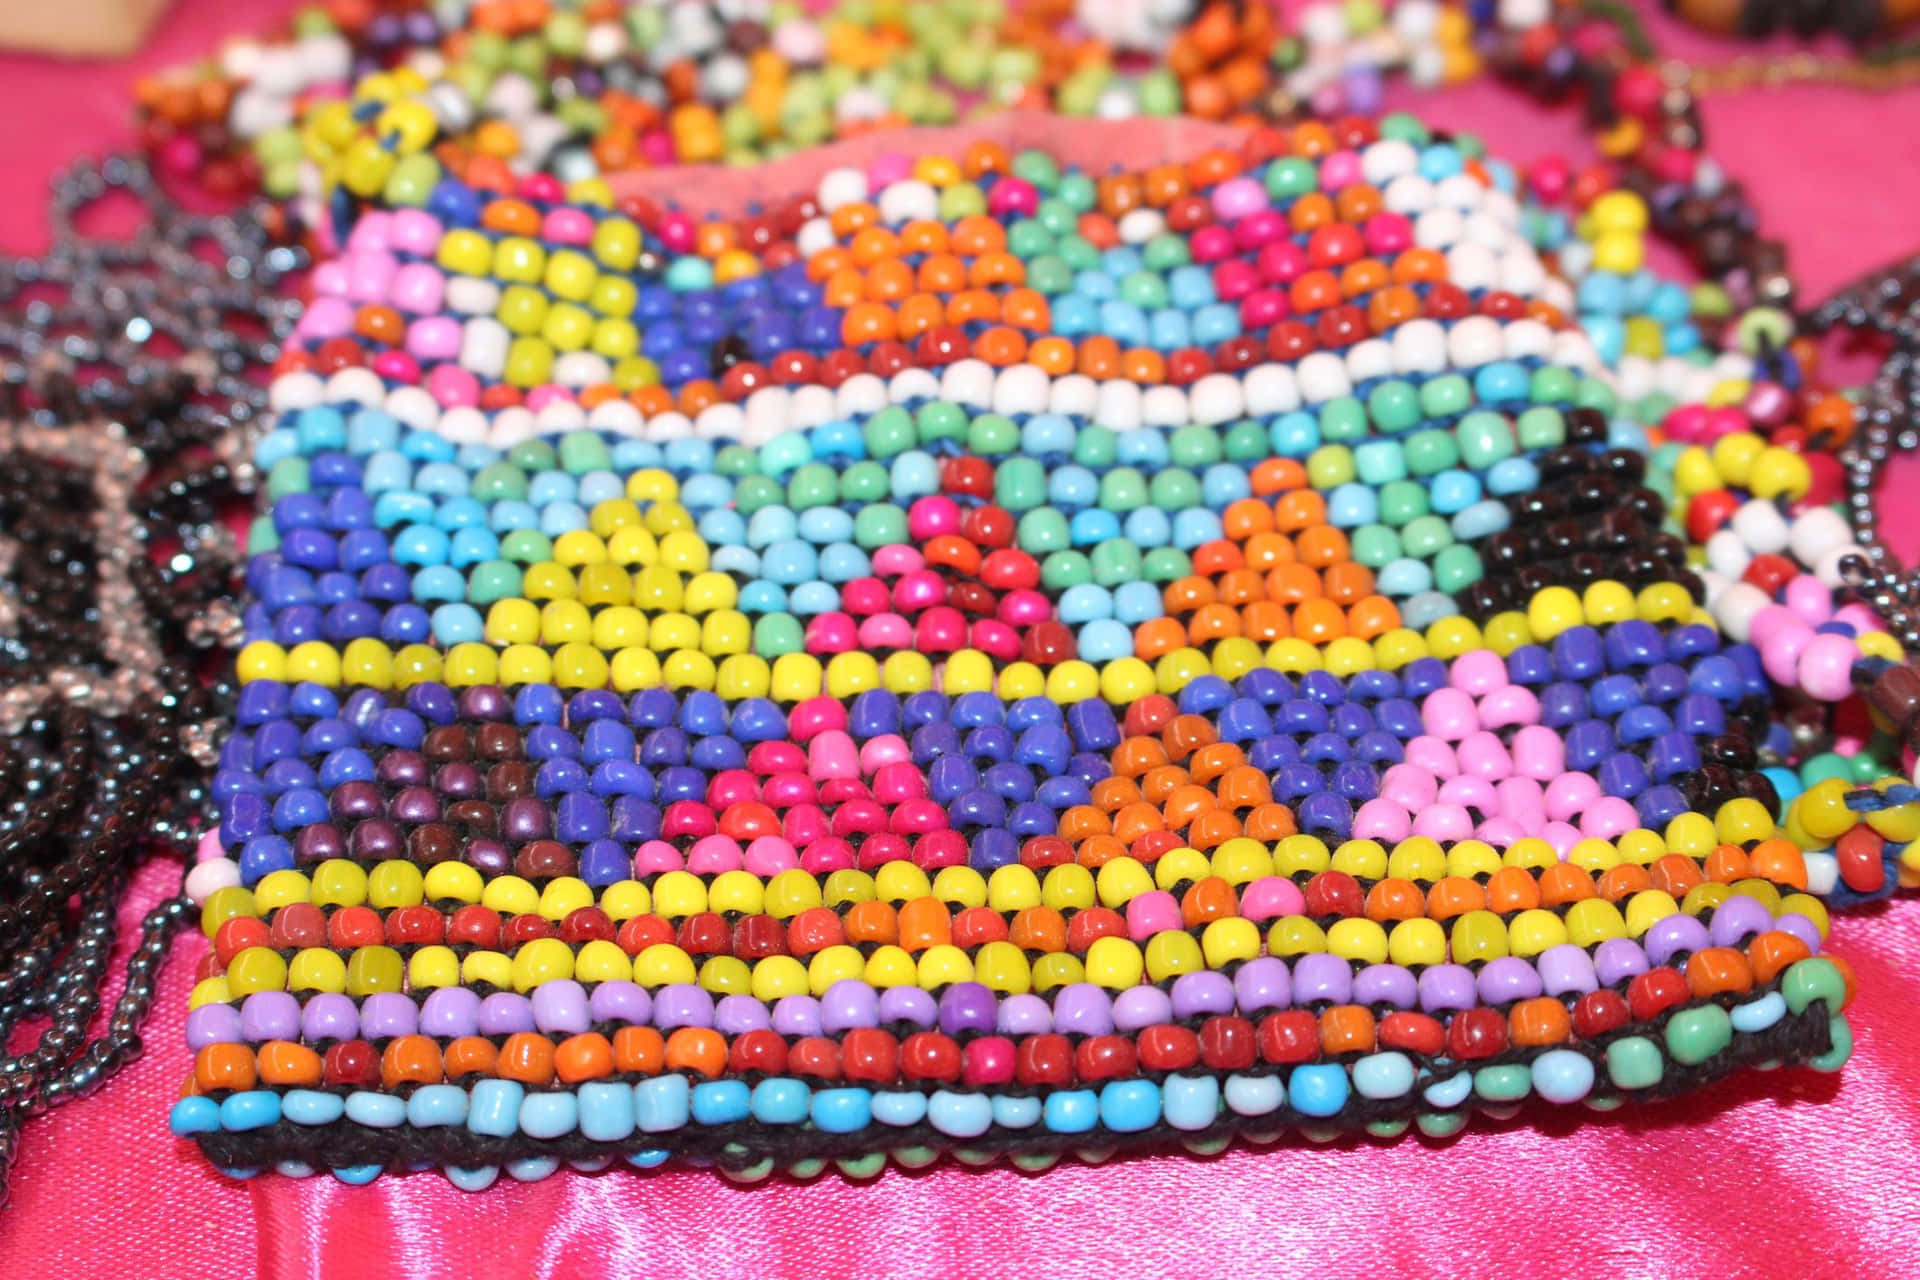 A Colorful Bag With Beads On It